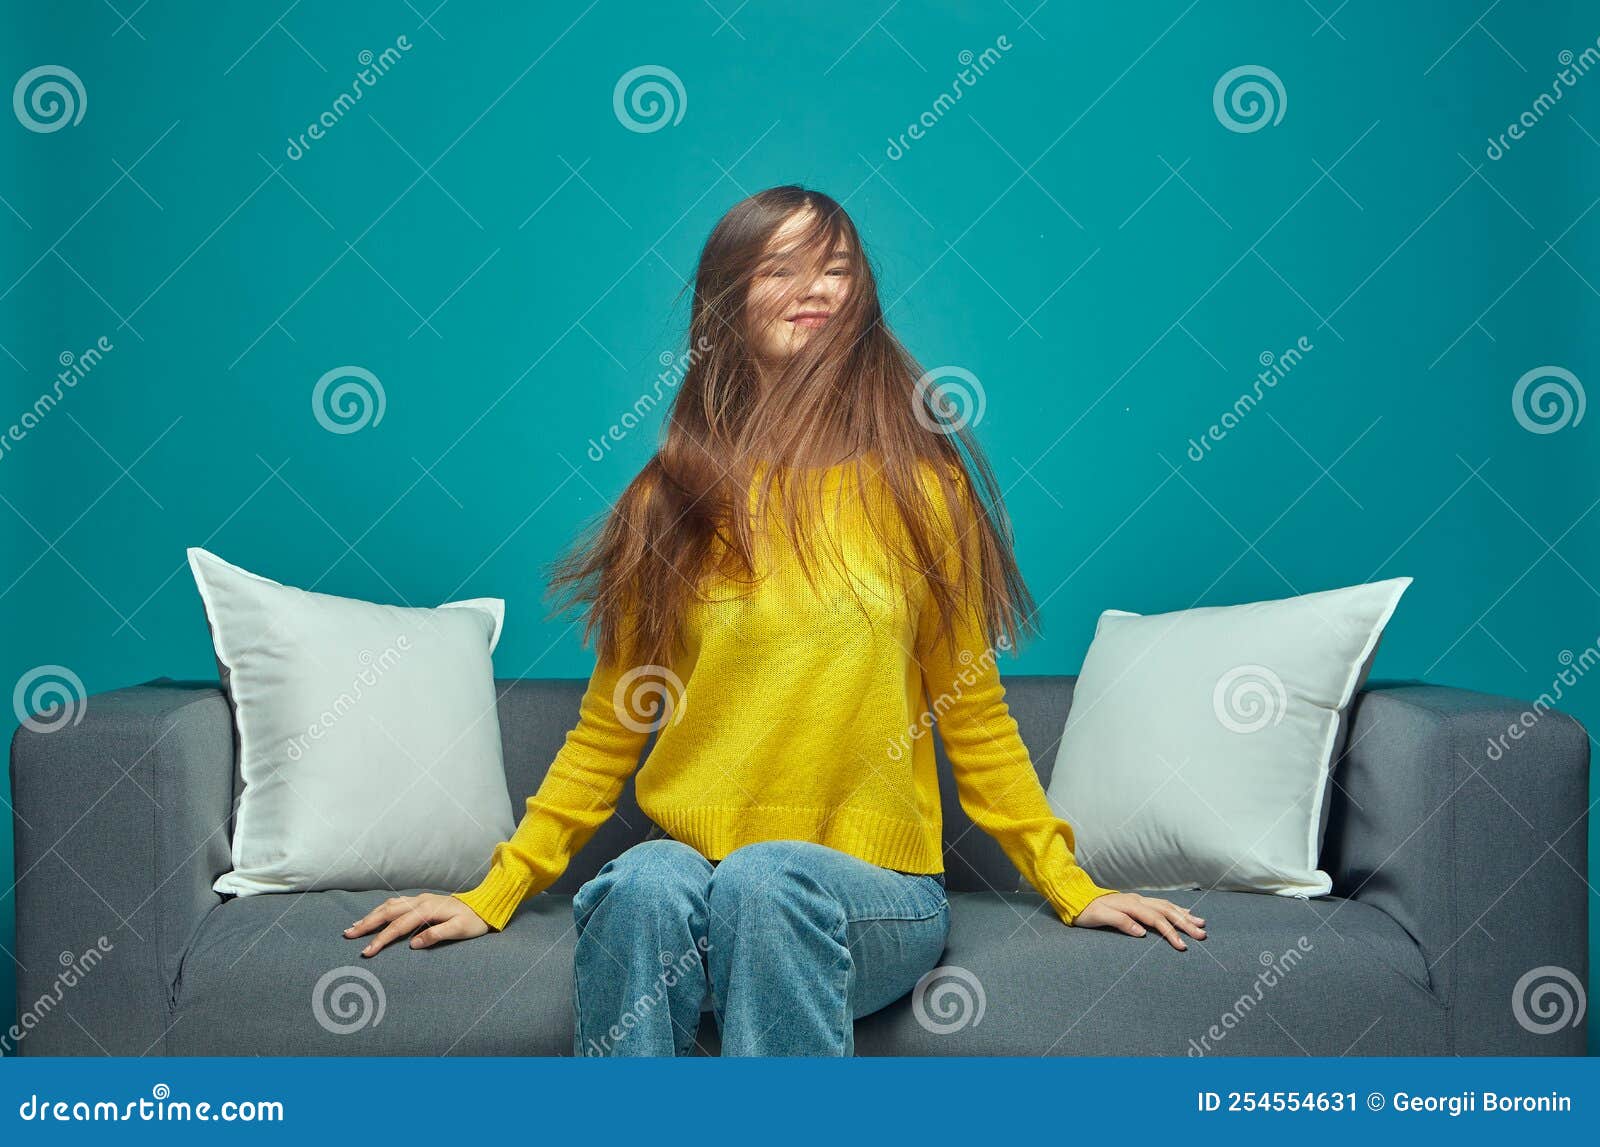 Modern Young Girl Shaking Her Long Brown Tousled Hair Enjoying Haircare Result Sitting On Sofa